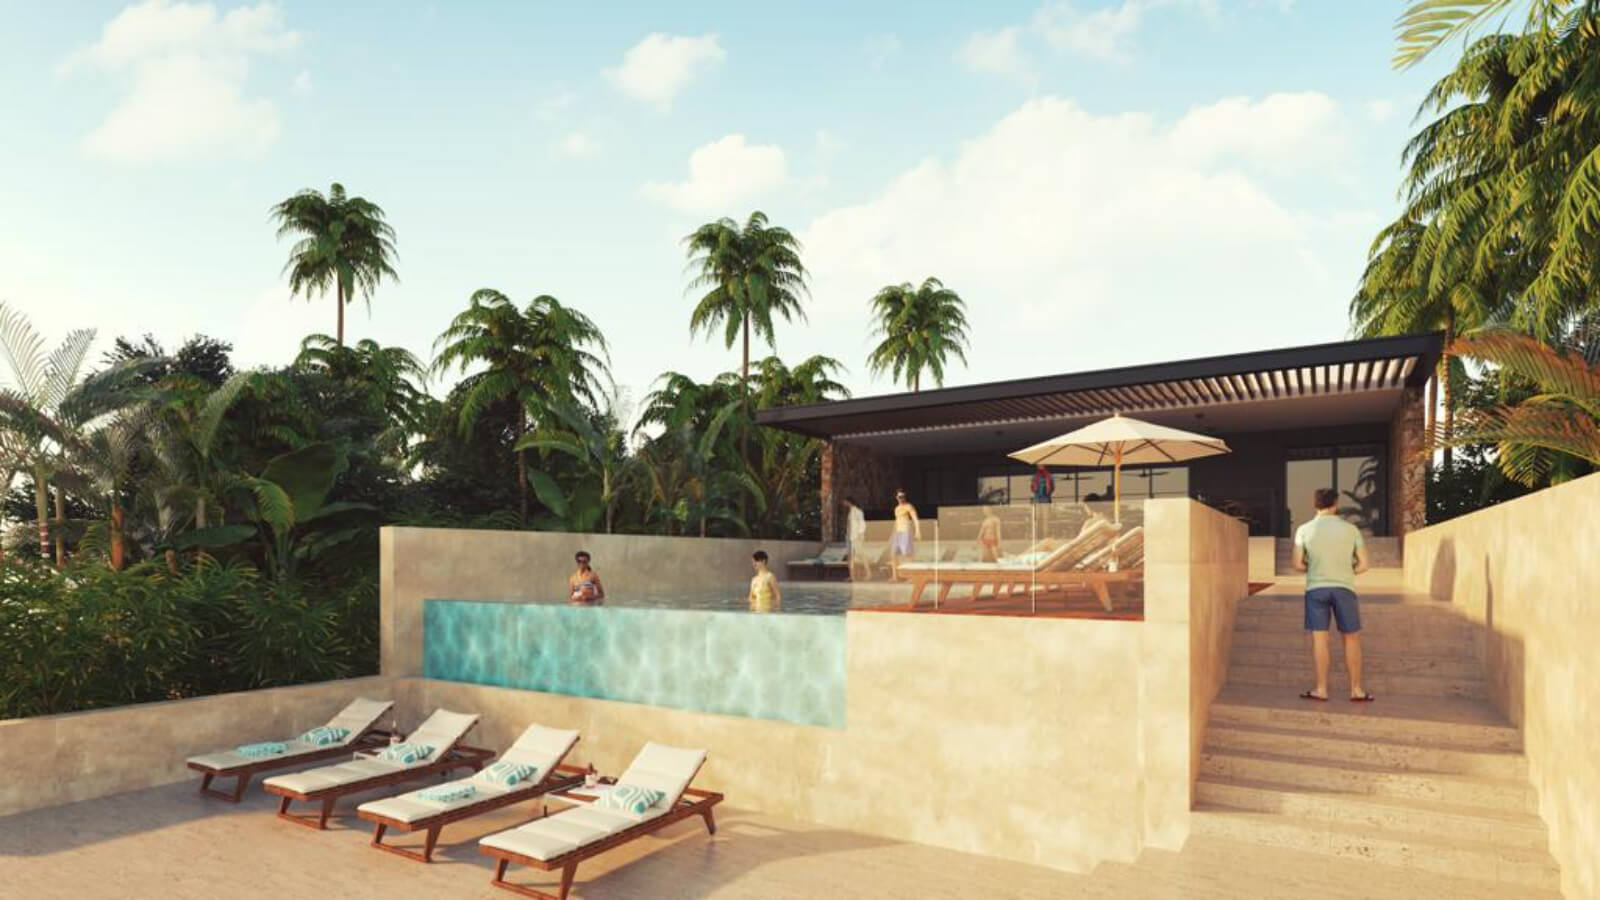 Condo with garden, private pool and terrace, close to the beach. for pre-sale Yucatán